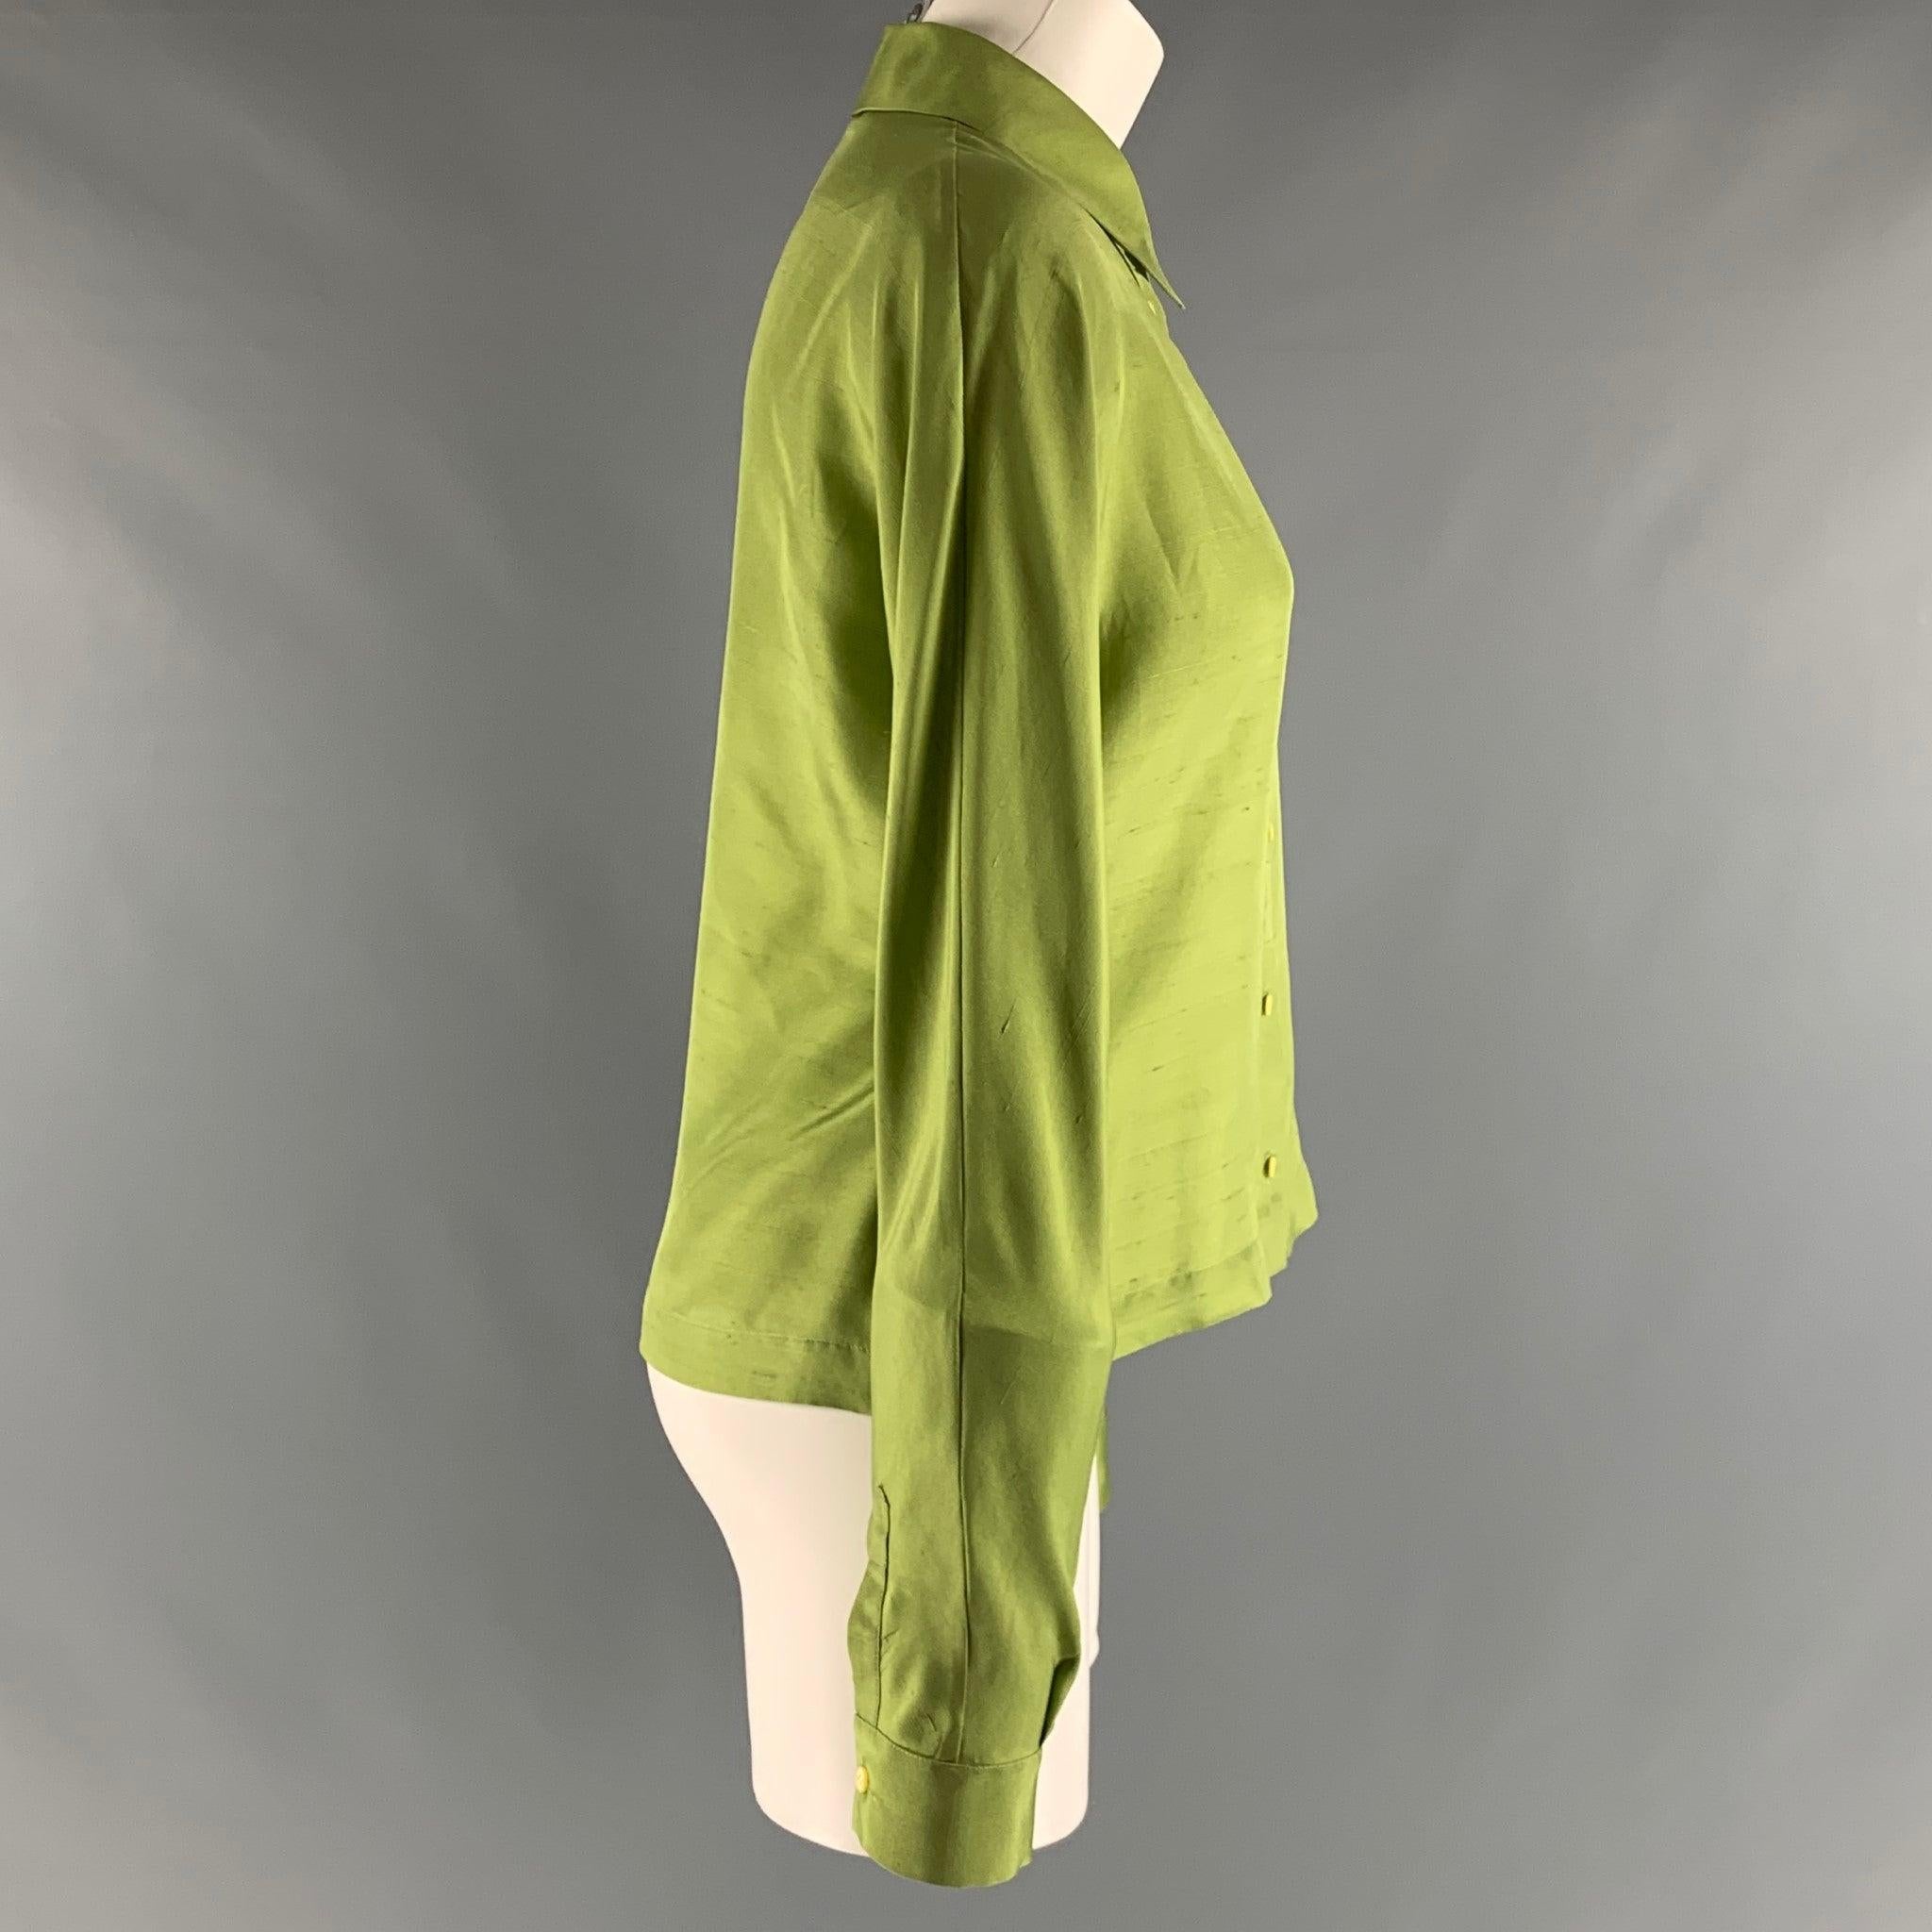 PRADA dress shirt comes in green silk woven material with a spread collar, and button up front. Made in Italy.Good Pre- Owned Conditions. Moderate marks on the left side. As- Is. 

Marked:  IT 46 

Measurements: 
 
Shoulder: 17 inches Chest: 38